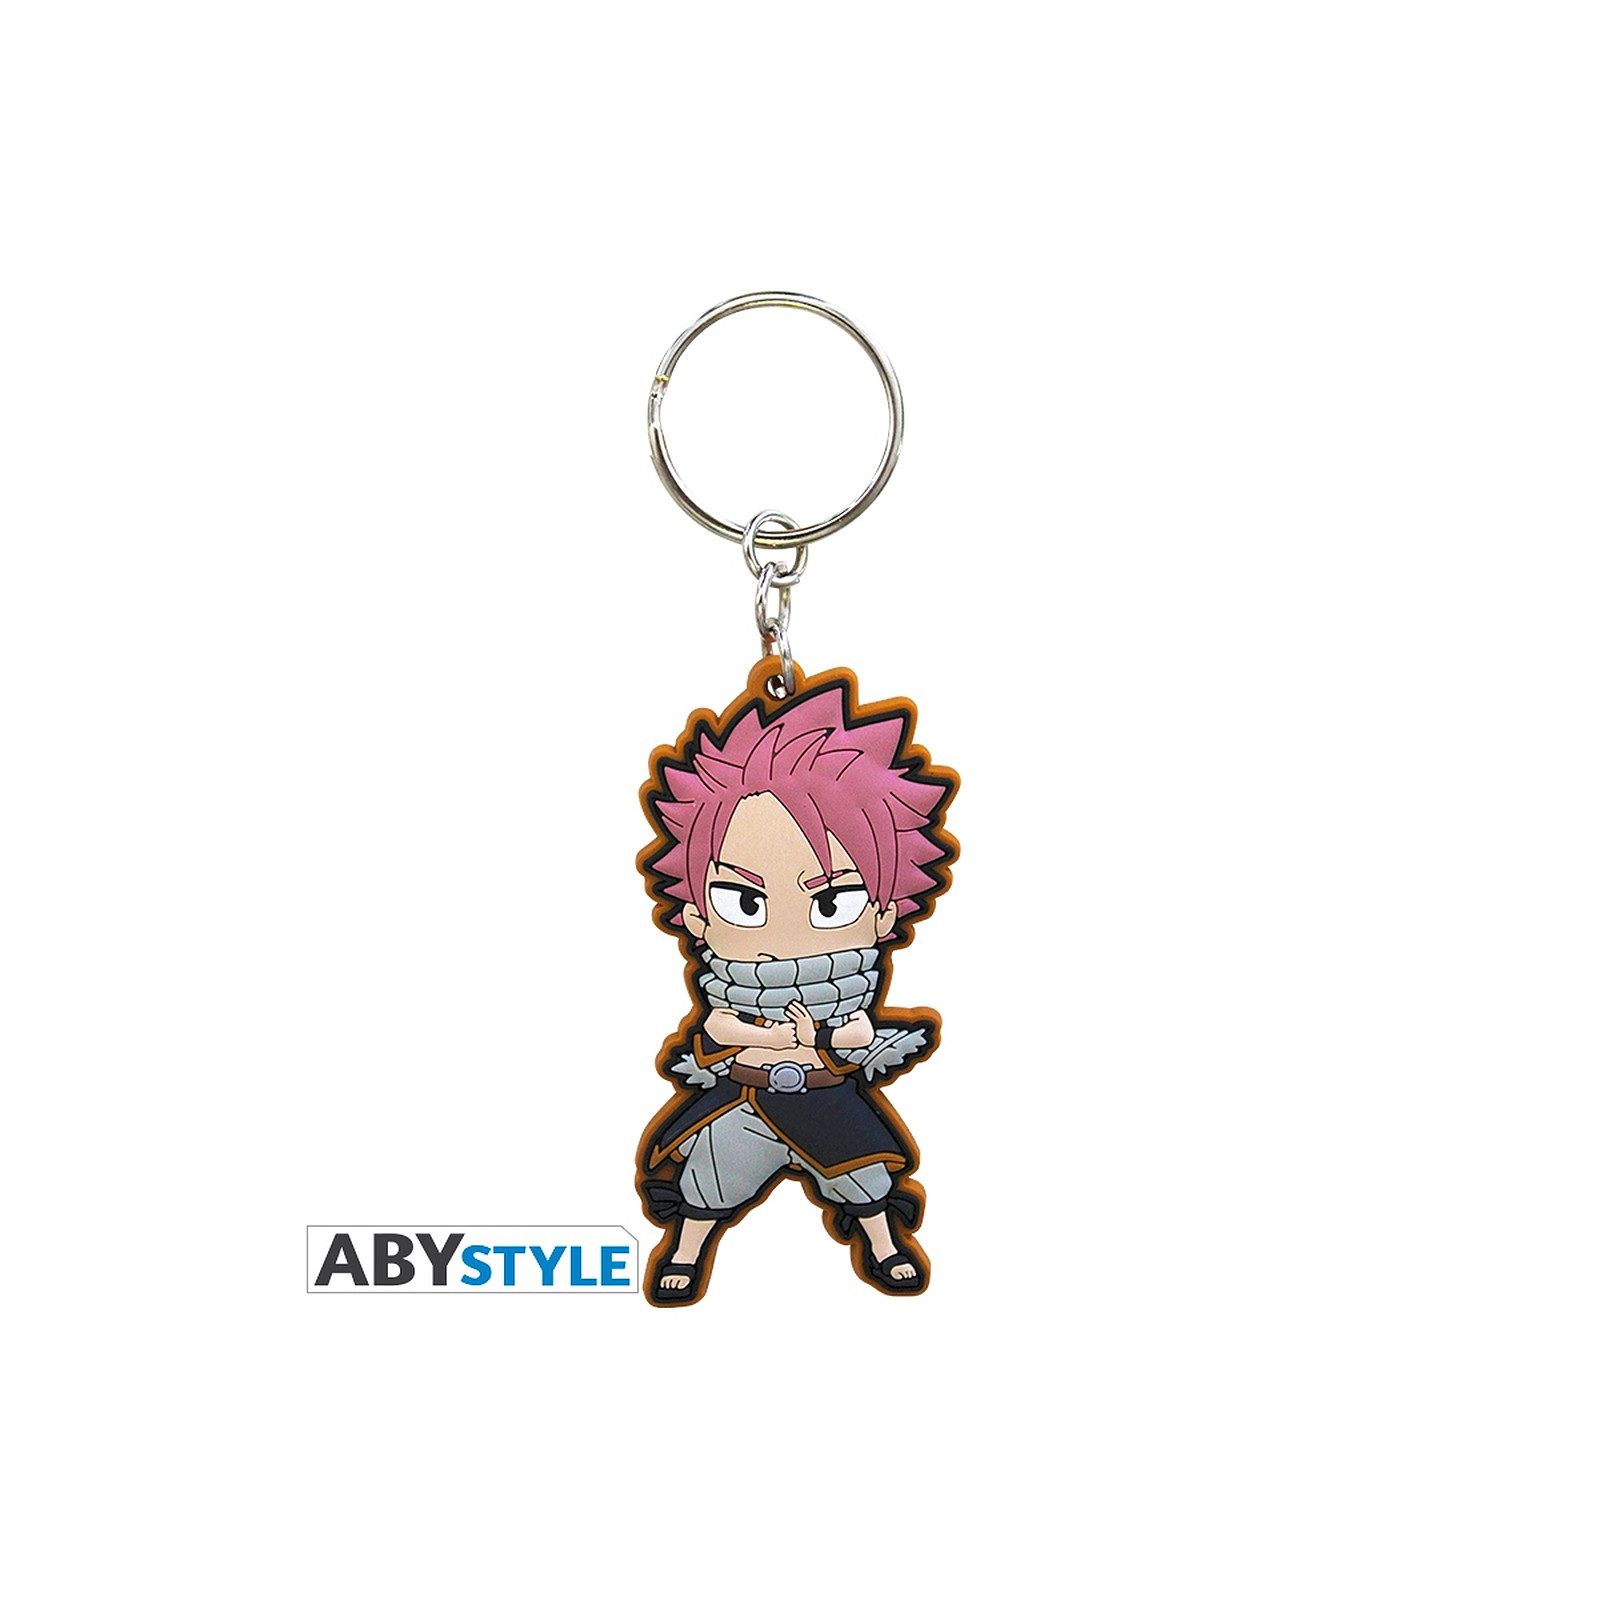 Fairy Tail - Porte-cles Natsu - Porte-cles Abystyle